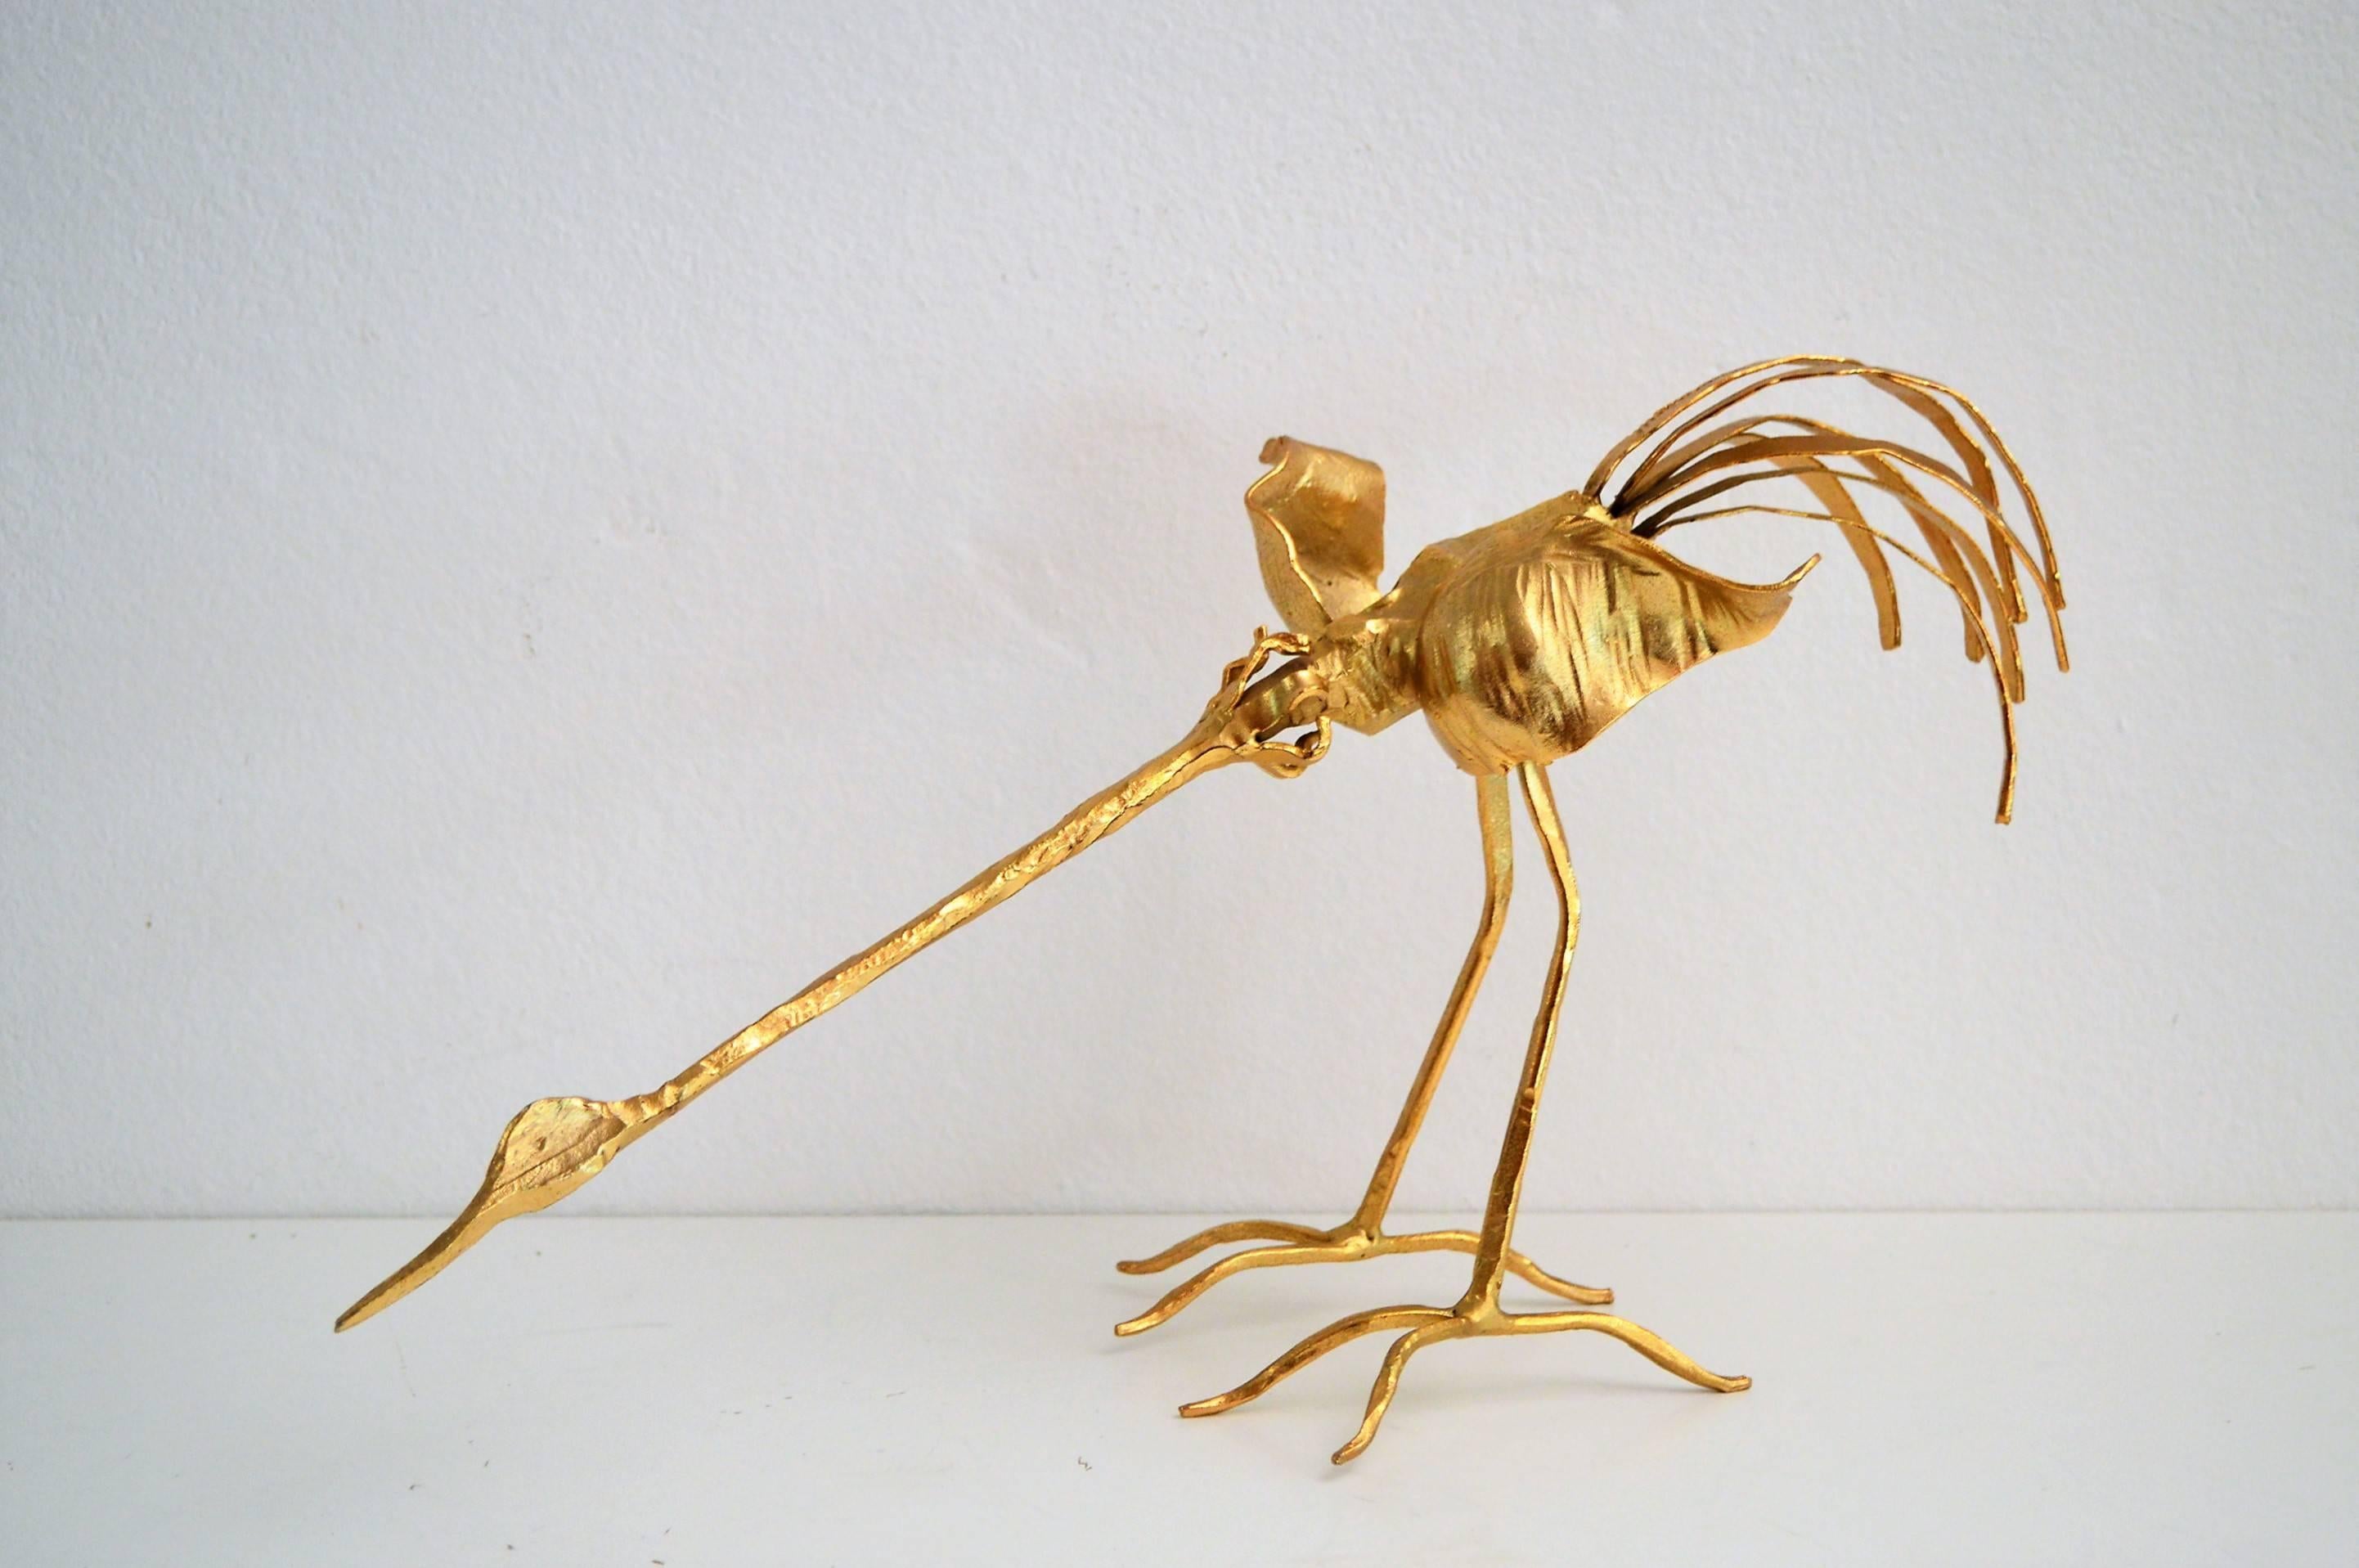 Gorgeous signed crane sculpture made of gilt wrought iron by Salvino Marsura in Italy during the late 1960s.
The sculpture is very shiny and in excellent condition.
Objects from Marsura are mostly sold in auction houses.

Salvino Marsura is an